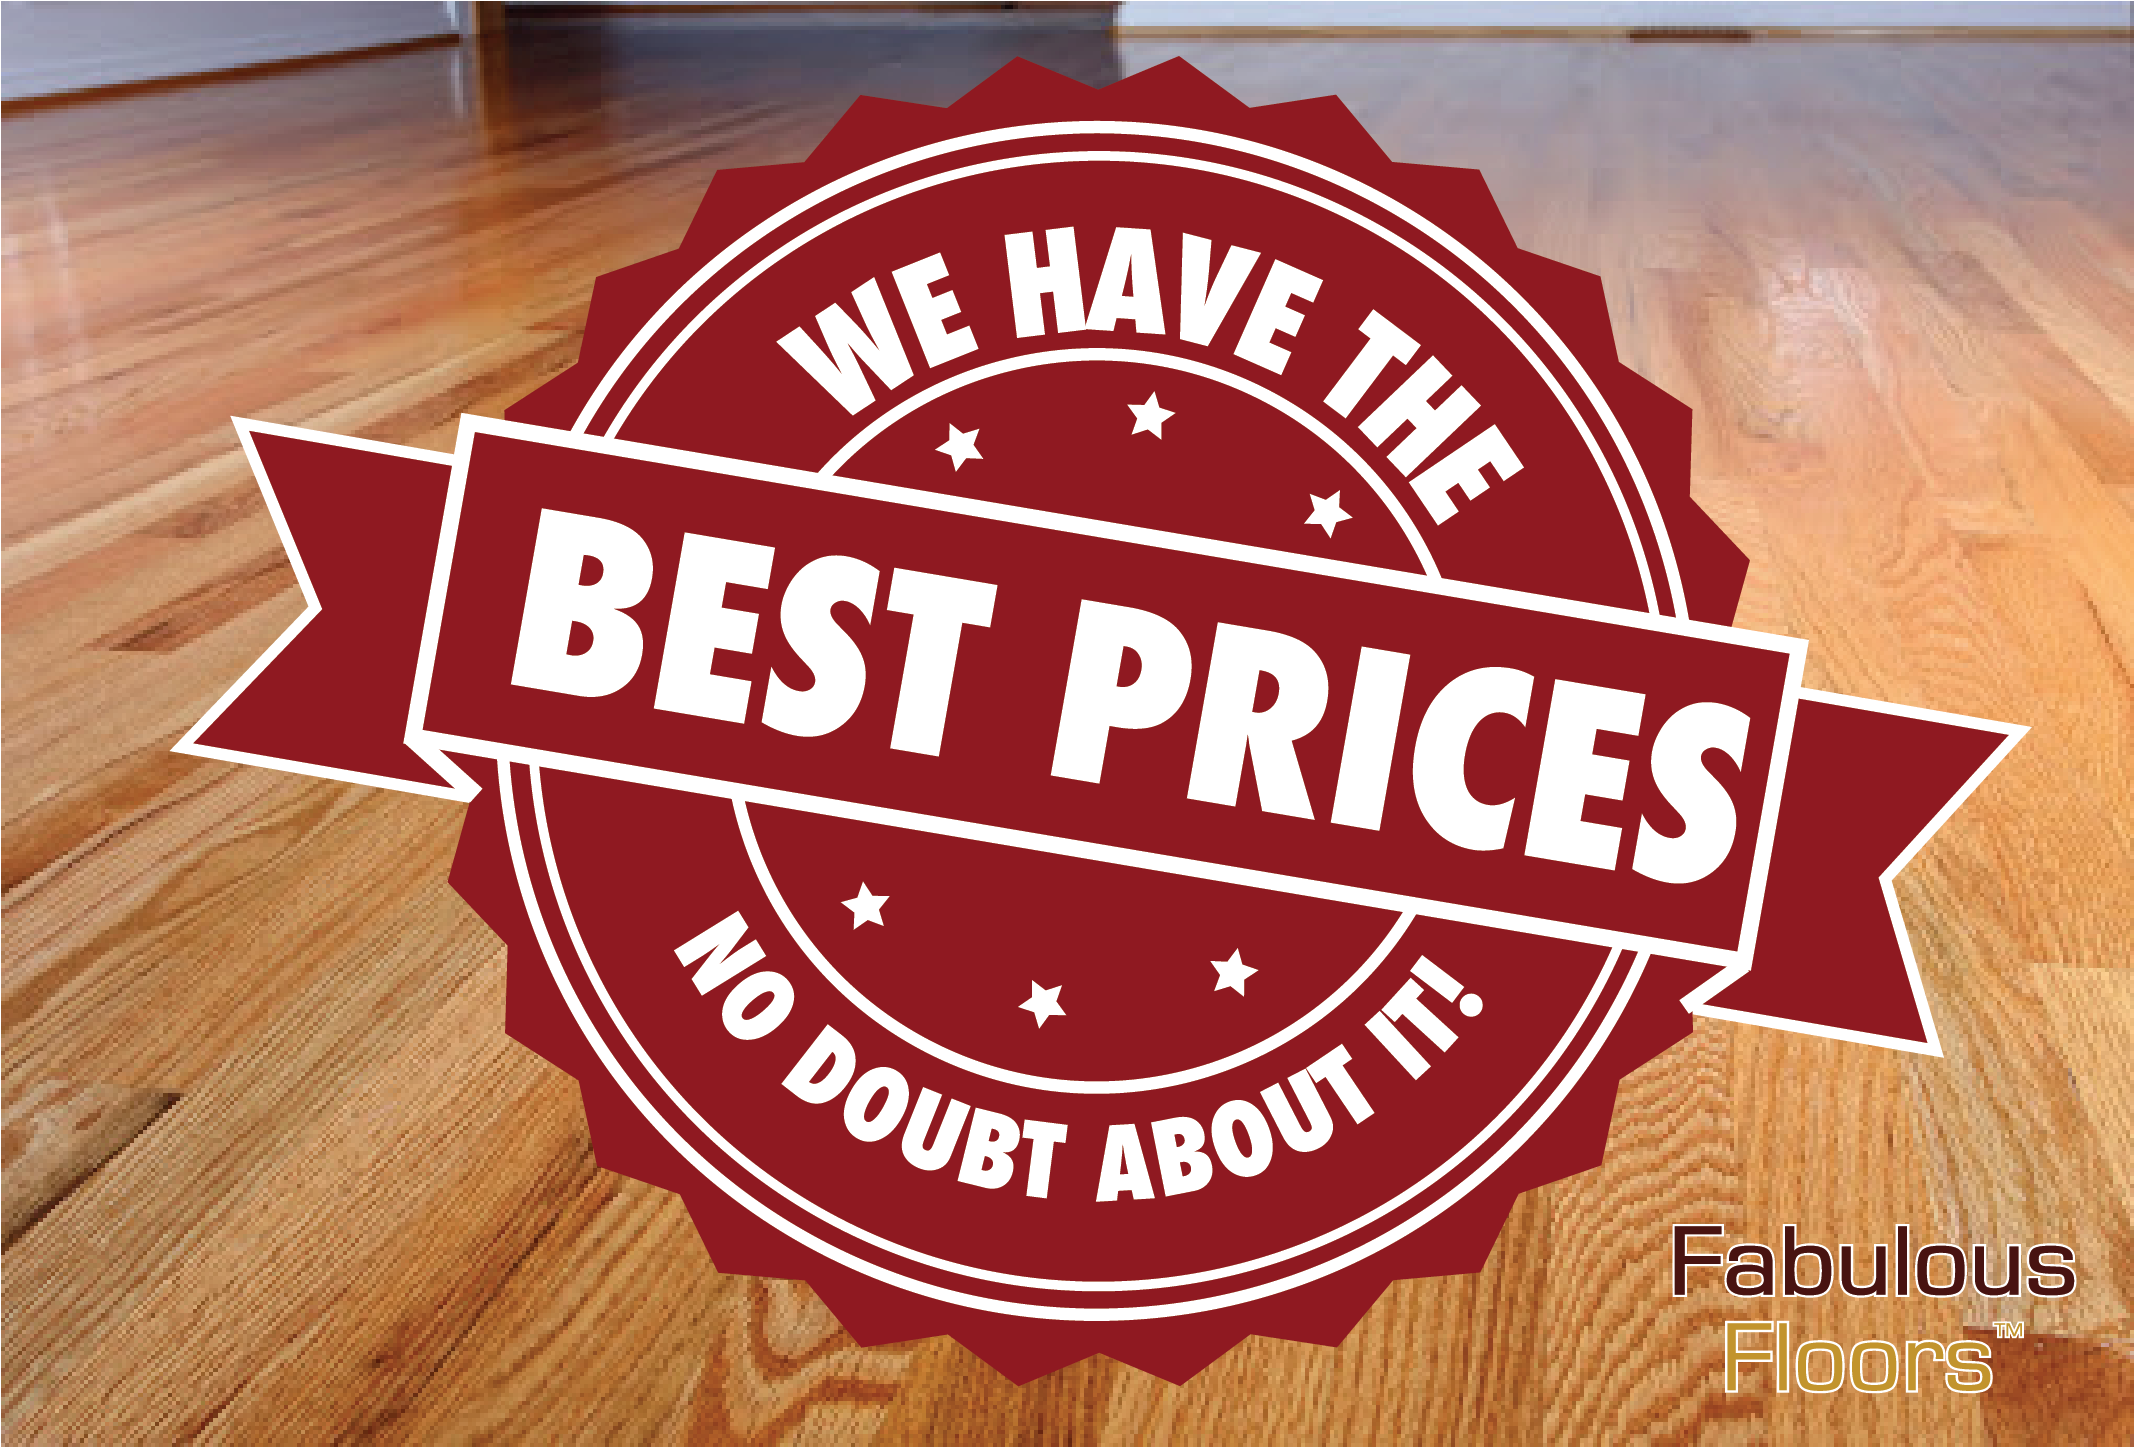 A graphic saying that we have the best prices around no doubt about it